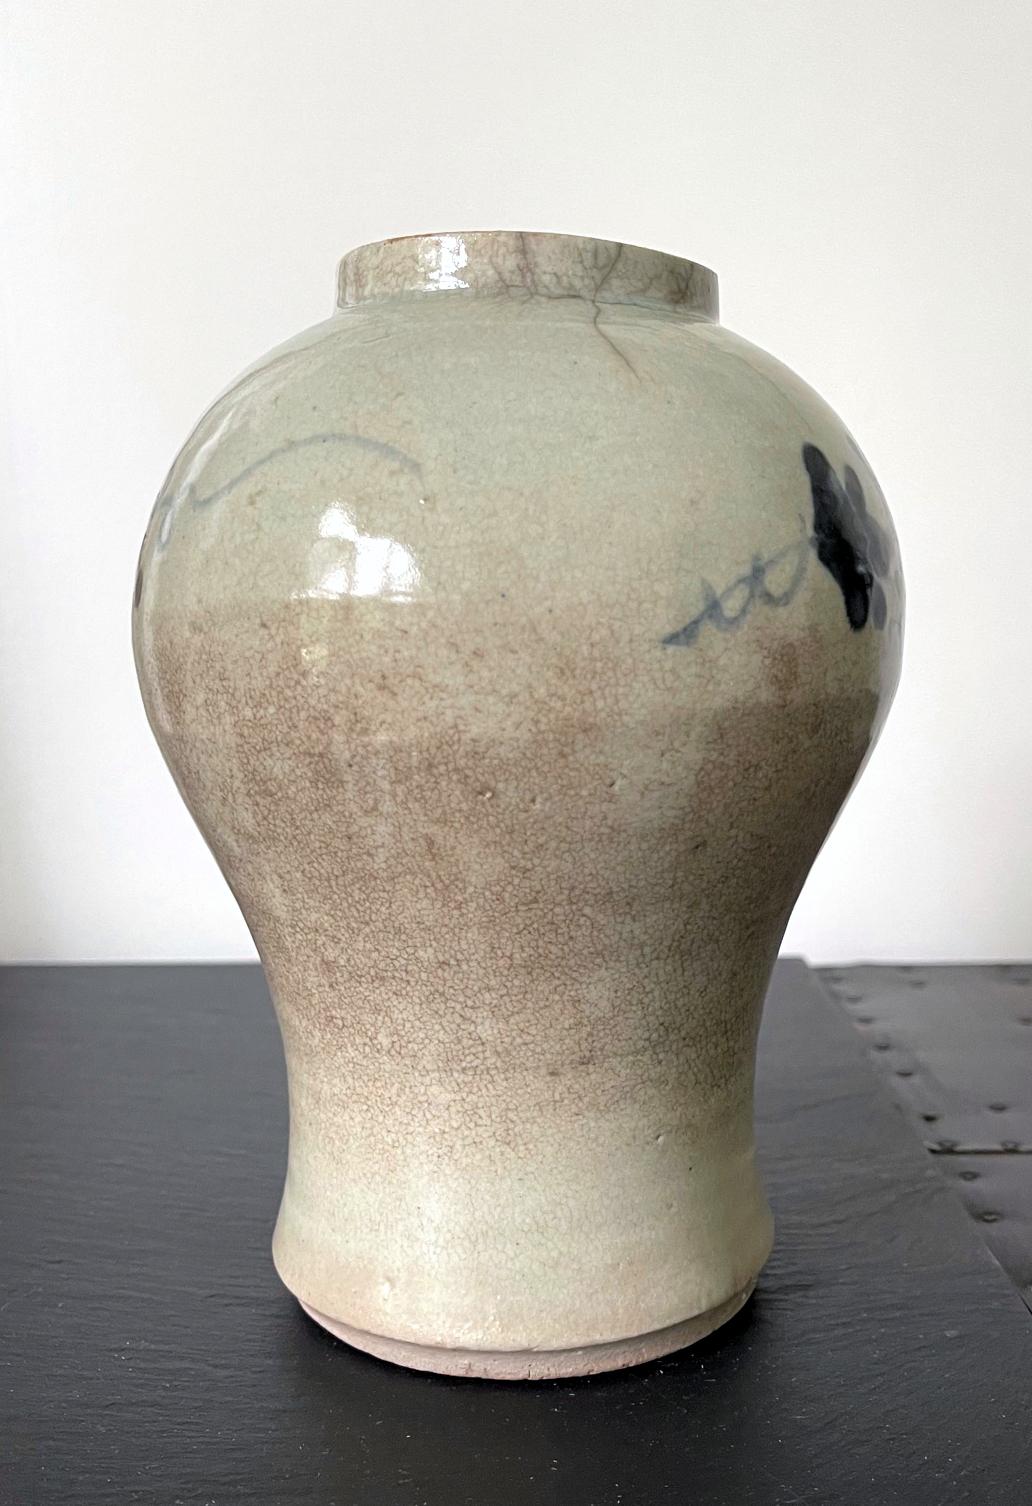 A Korean ceramic storage jar circa 18th century of Joseon Dynasty. The jar is of a characteristic form with a bulbous upper body that tappers with a graceful concave to the foot (a form known as Maebyong in Korea and Plum Vase in Chinese). An